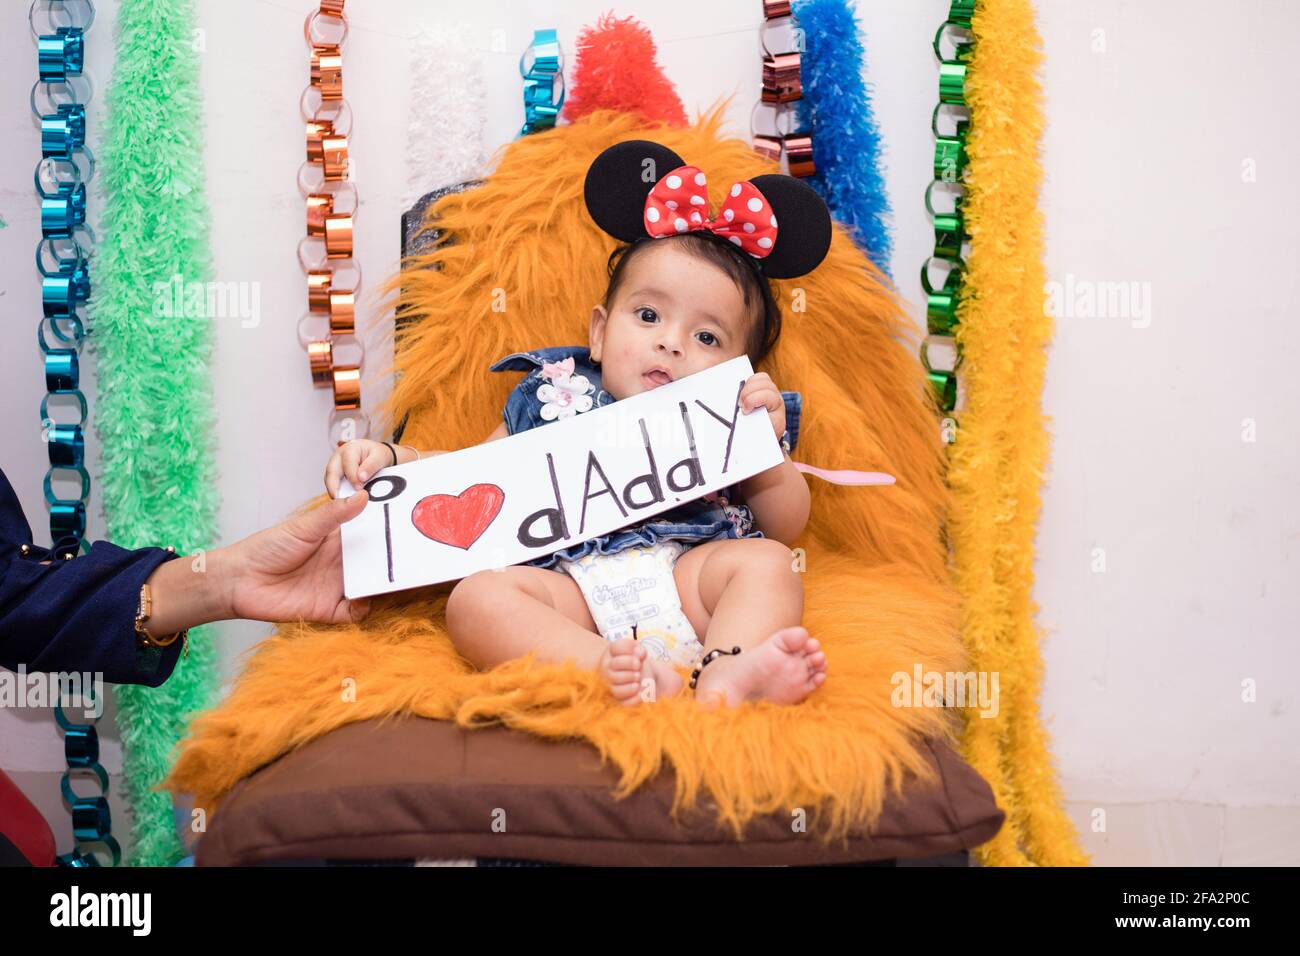 Closeup Shot Of A Cute Happy Indian Female Baby Sitting On A Teddy Bear Holding An I Love Daddy Sign Stock Photo Alamy